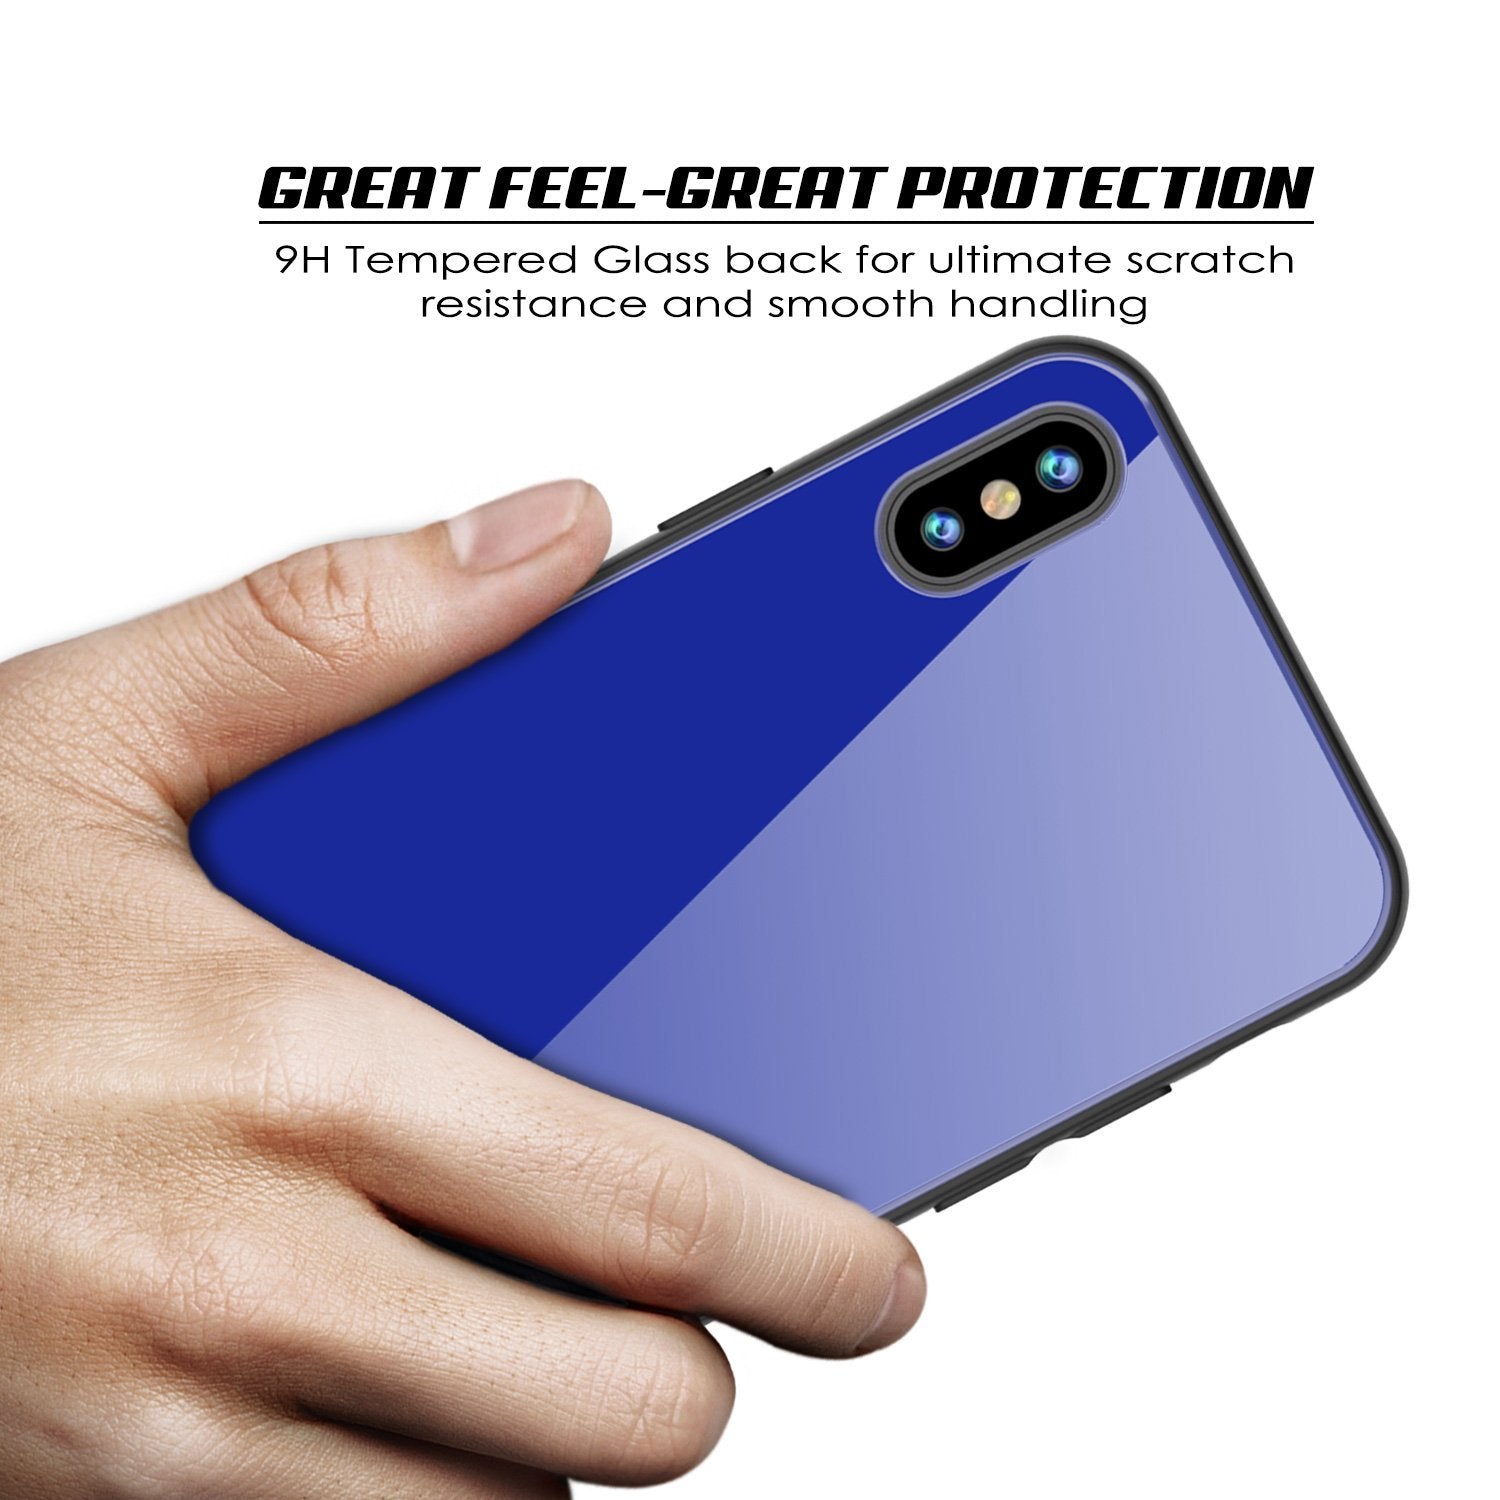 iPhone 8 Case, Punkcase GlassShield Ultra Thin Protective 9H Full Body Tempered Glass Cover W/ Drop Protection & Non Slip Grip for Apple iPhone 7 / Apple iPhone 8 (Blue) - PunkCase NZ